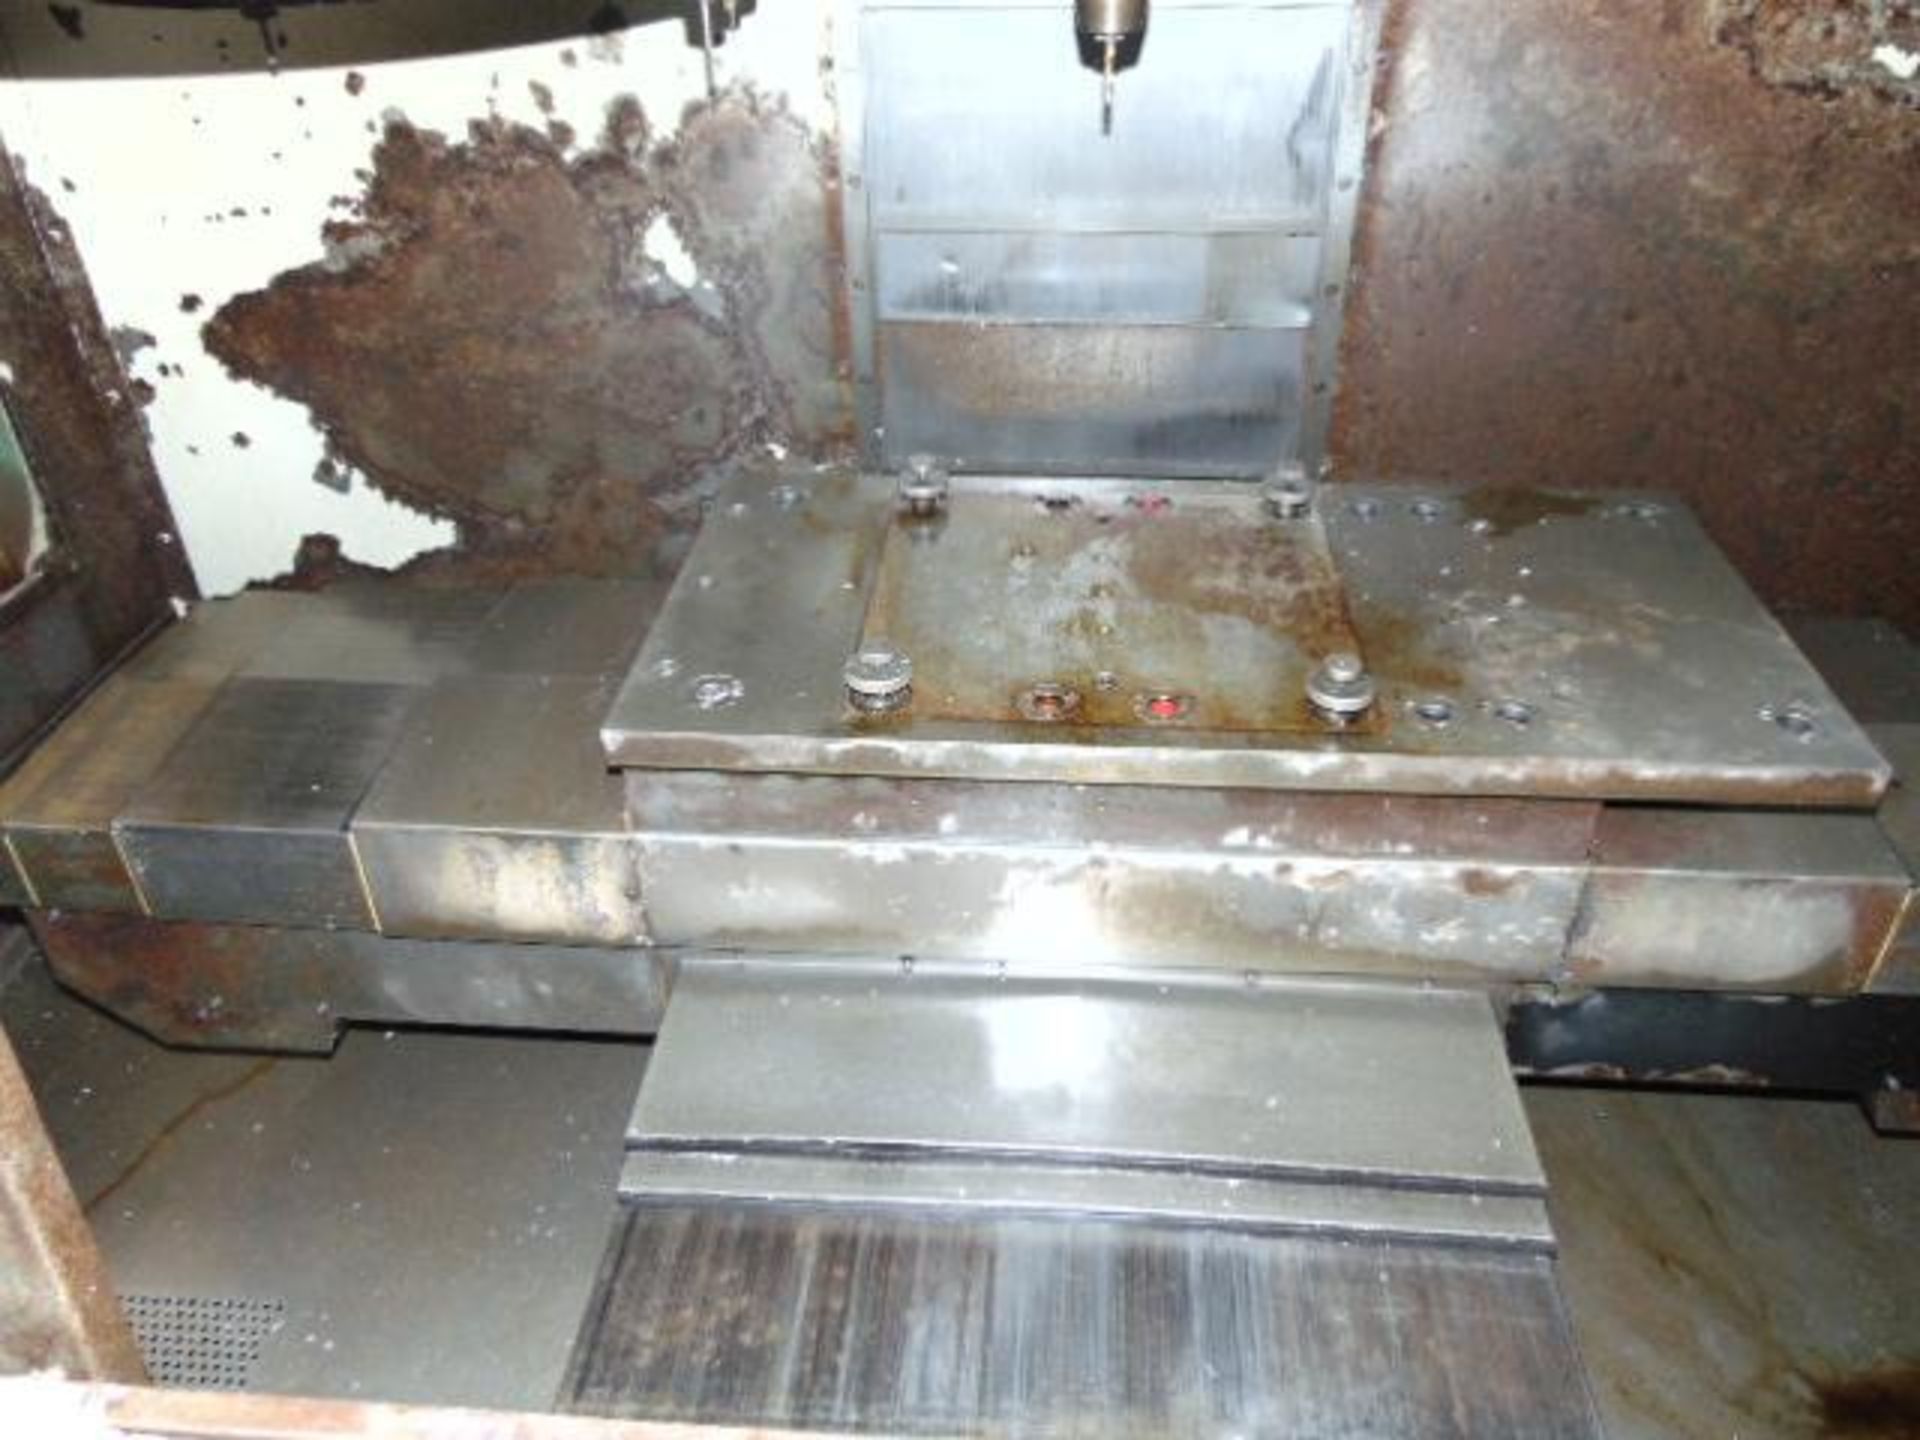 4-AXIS VERTICAL MACHINING CENTER, HAAS MDL. VF1, new 1997, 26" x 14" tbl. size, 20" X, 16" Y, 20" Z- - Image 5 of 10